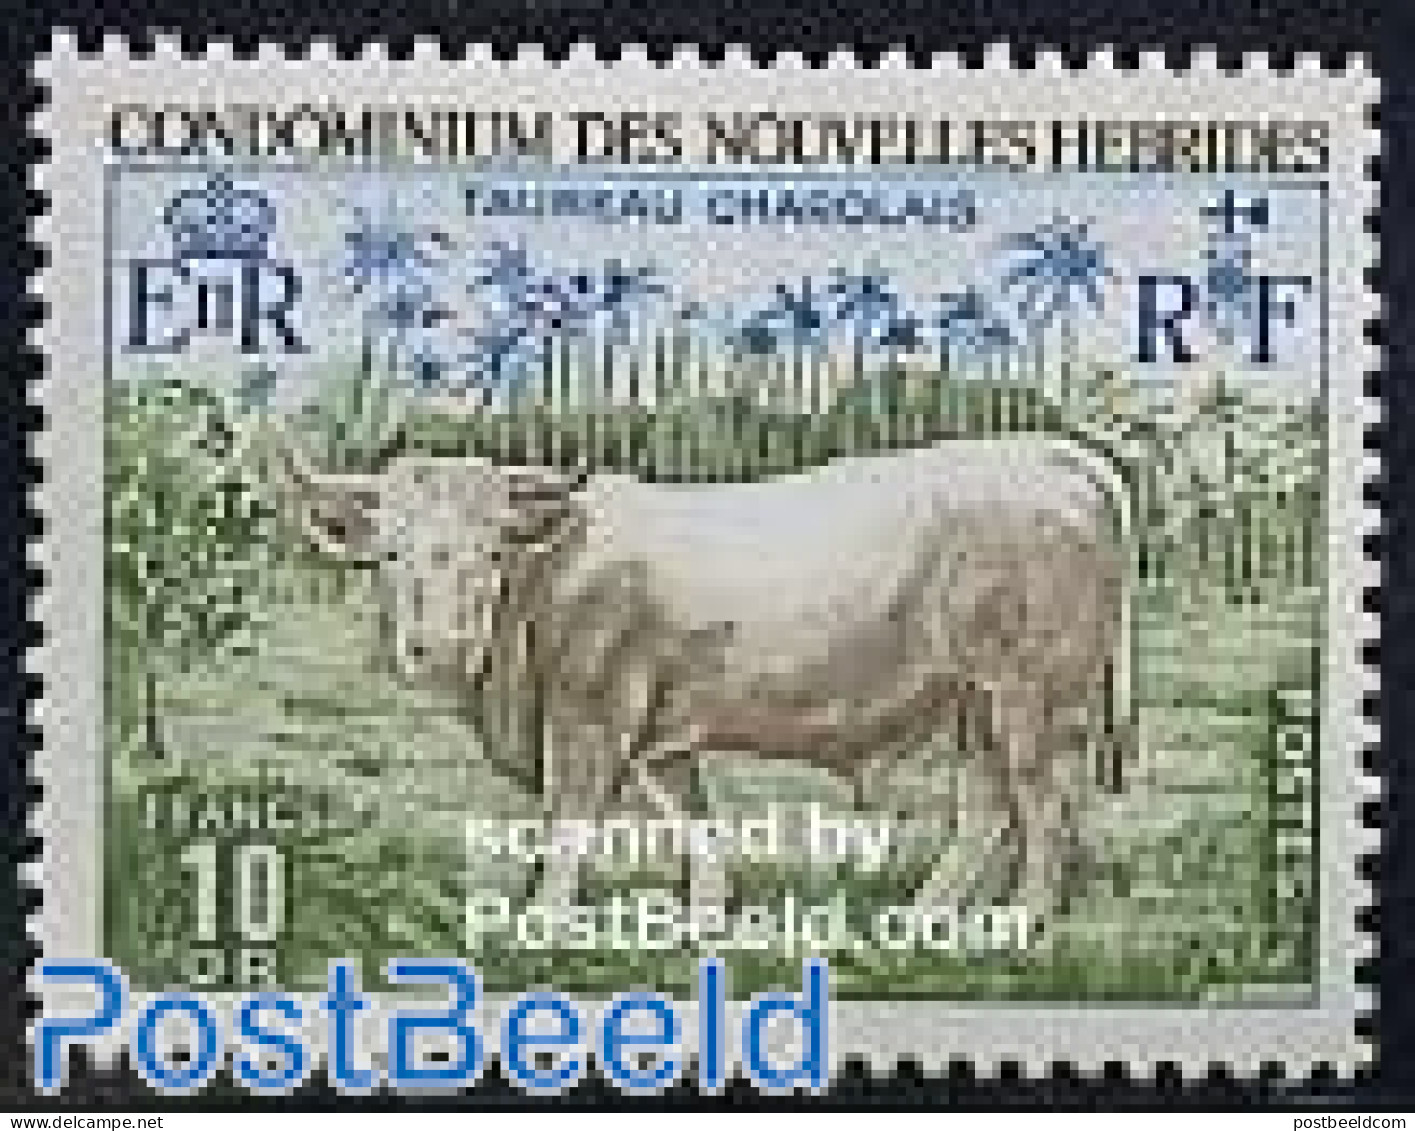 New Hebrides 1975 Definitive 1v F, Mint NH, Nature - Animals (others & Mixed) - Cattle - Unused Stamps